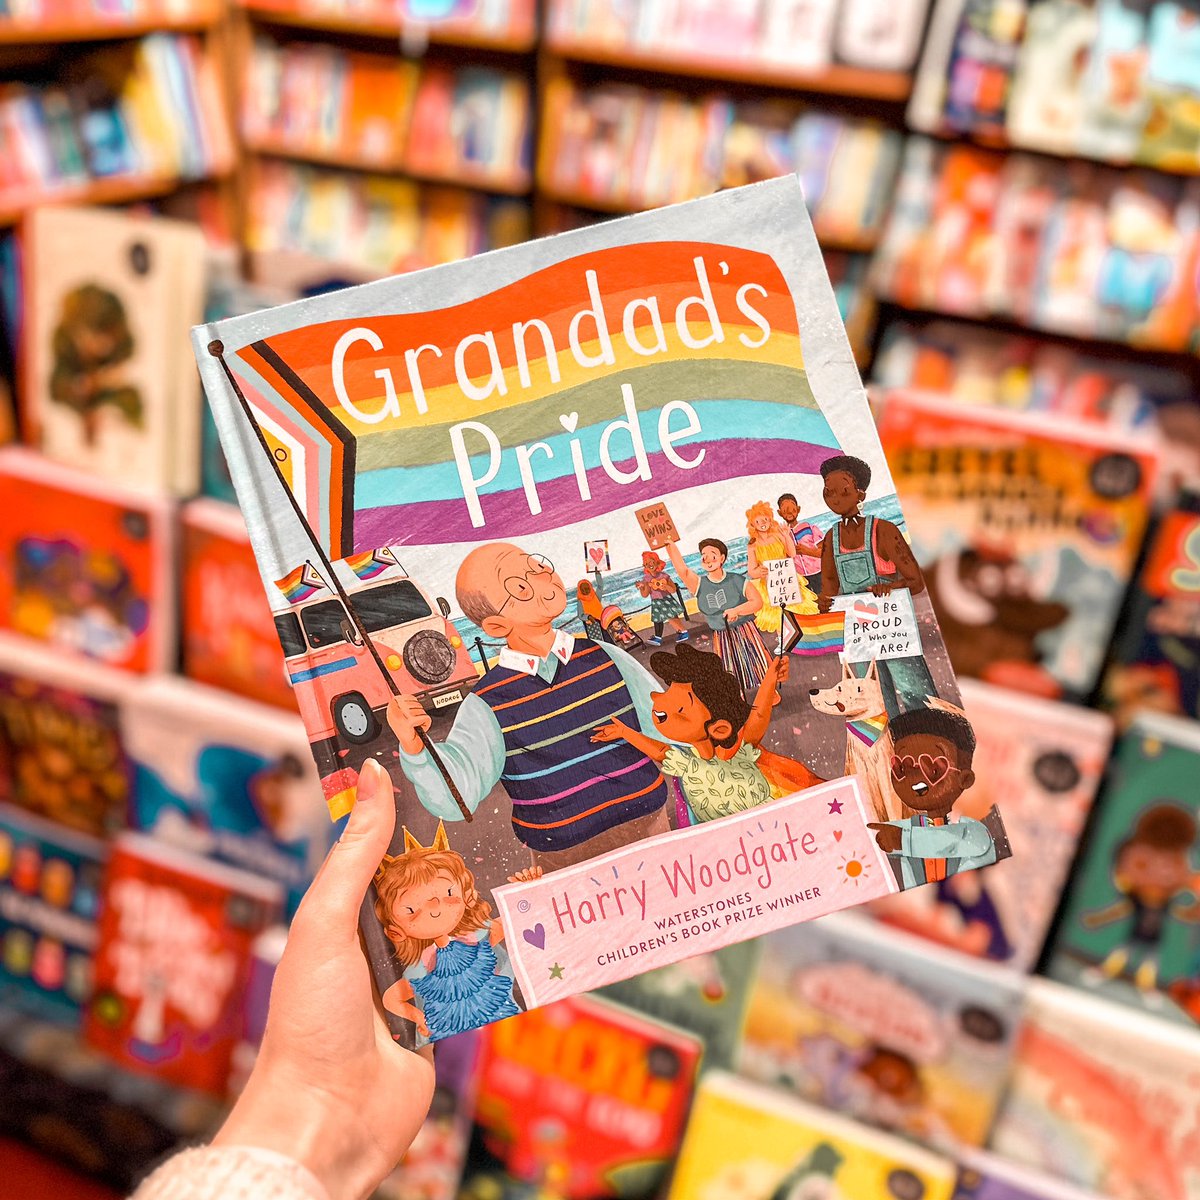 Following on from his Waterstones Children’s Book Prize category winner, Grandad’s Pride by Harry Woodgate celebrates the power of community and the importance of history 🏳️‍🌈

#waterstonesnorthallerton #northallerton #lovenorthallerton #waterstones #grandadscamper #harrywoodgate